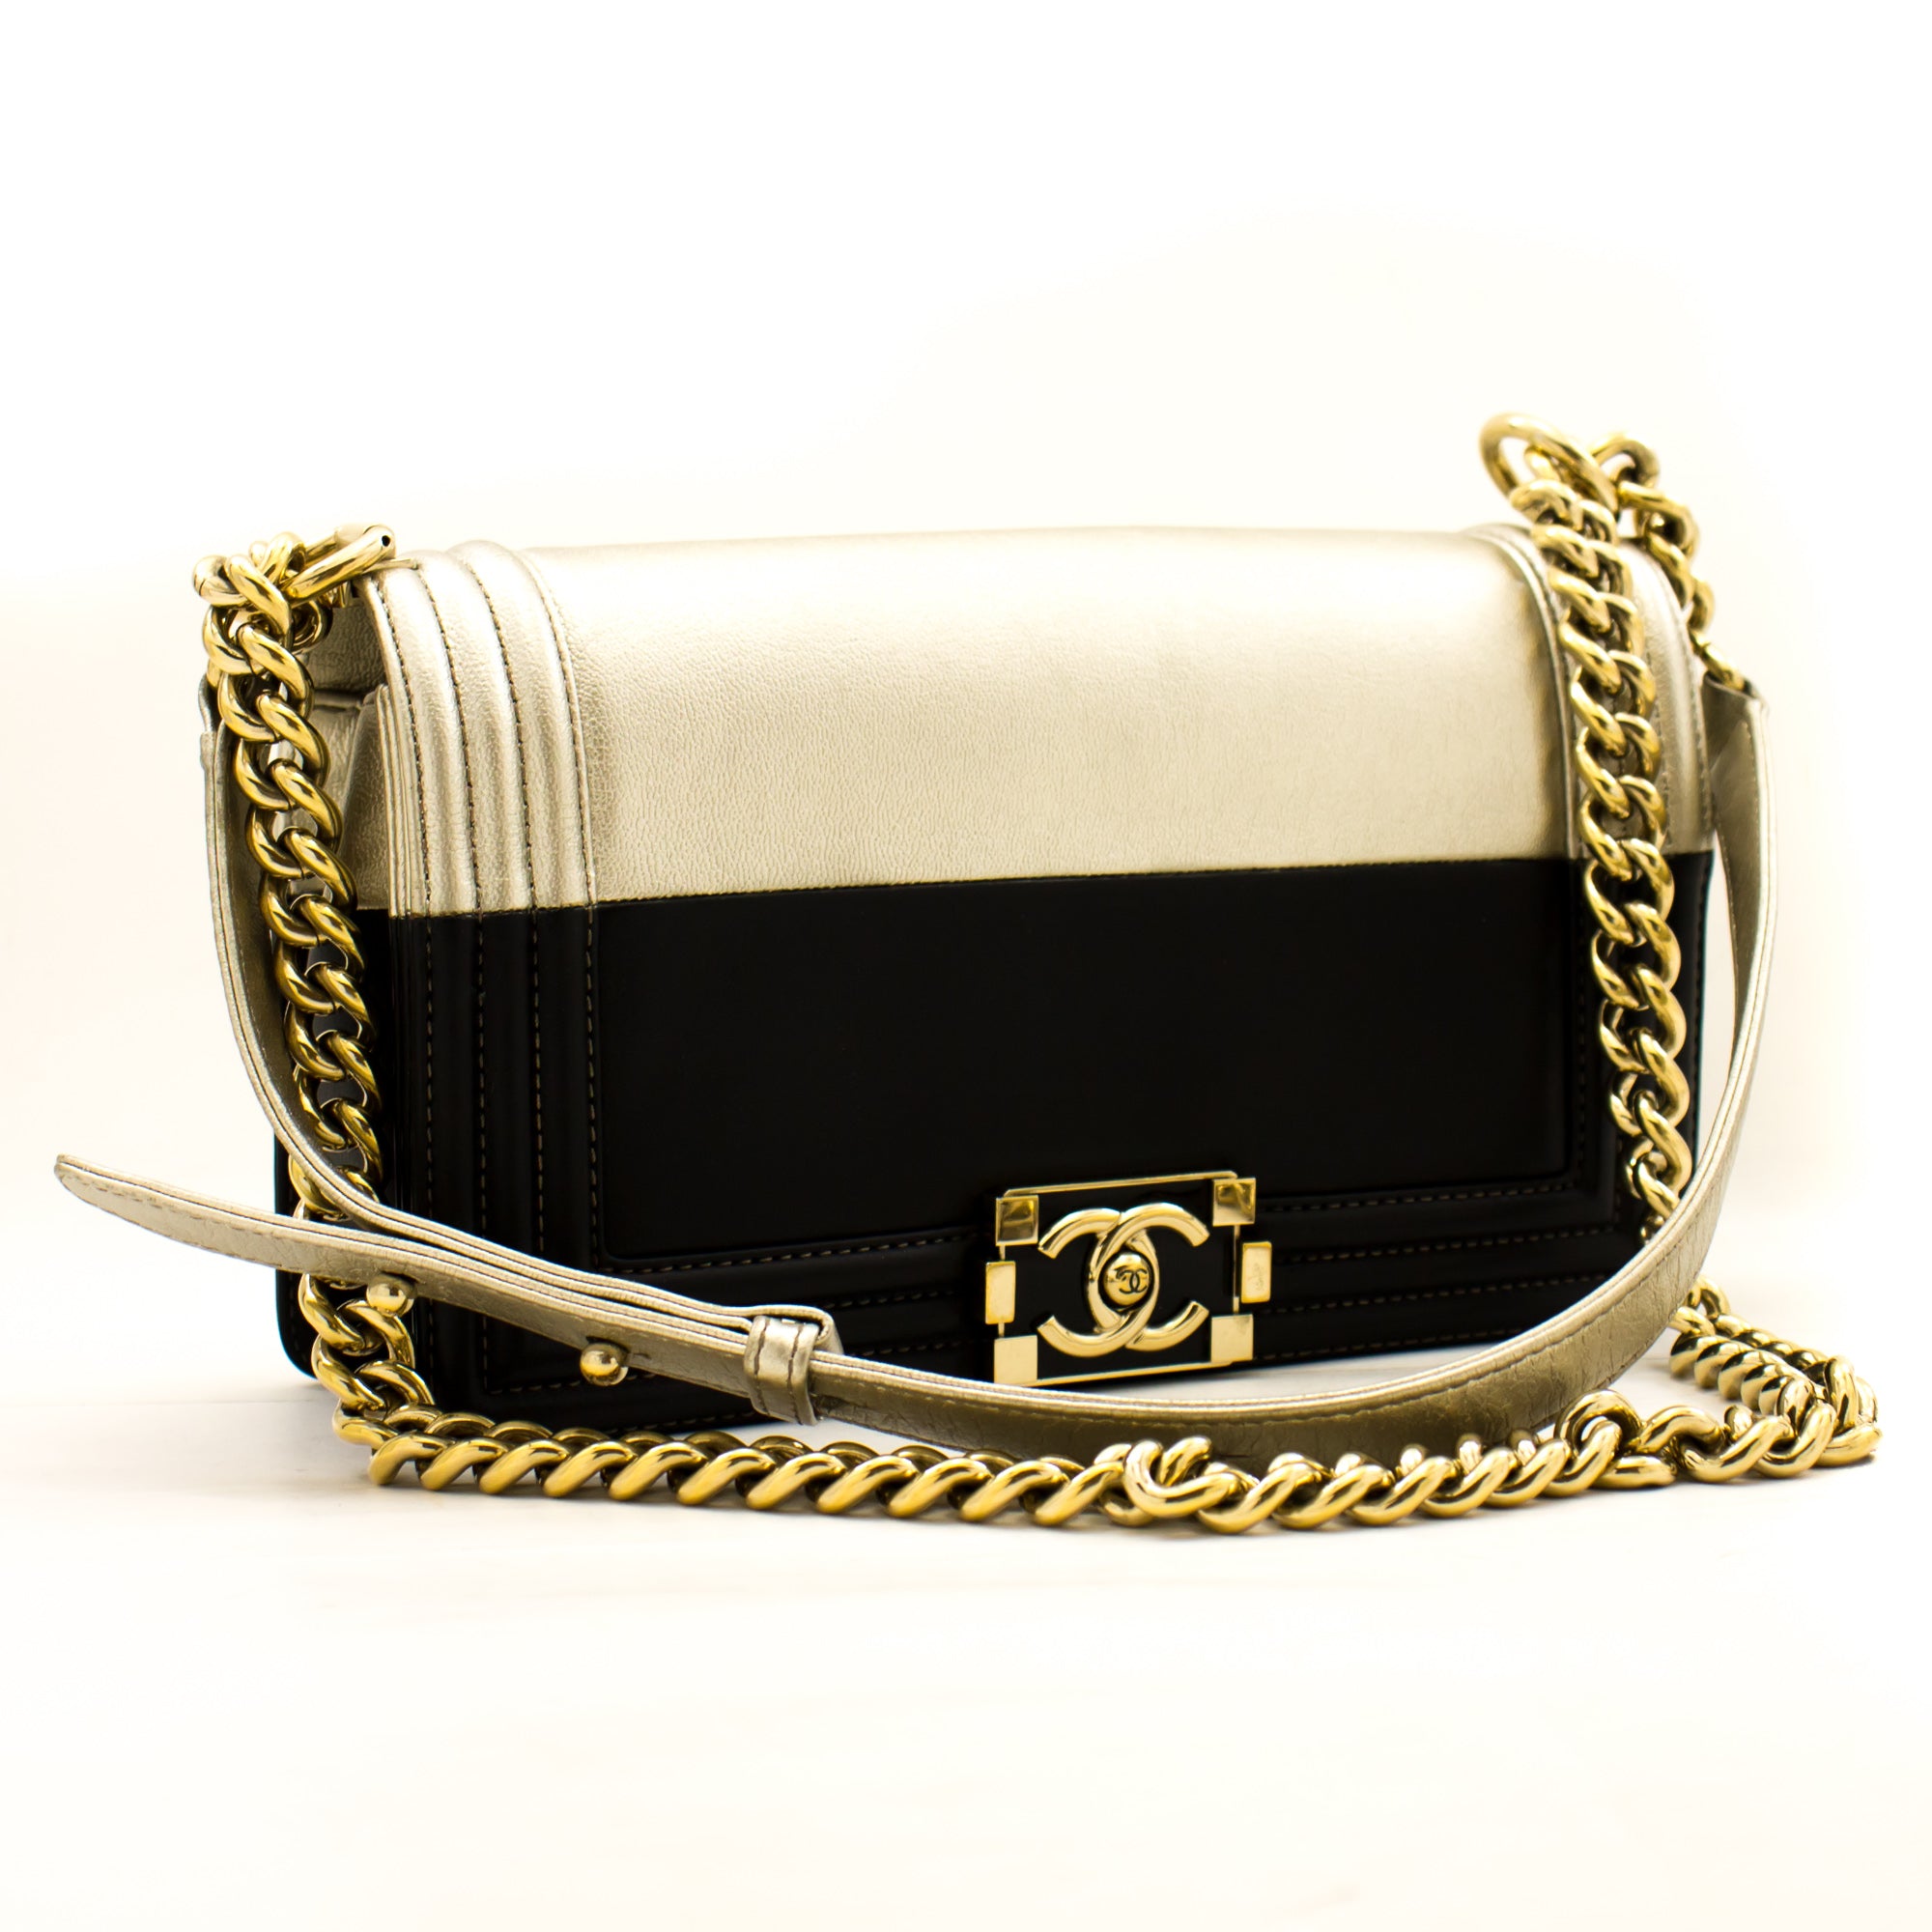 CHANEL Caviar Quilted Small Boy Messenger Bag Black | FASHIONPHILE